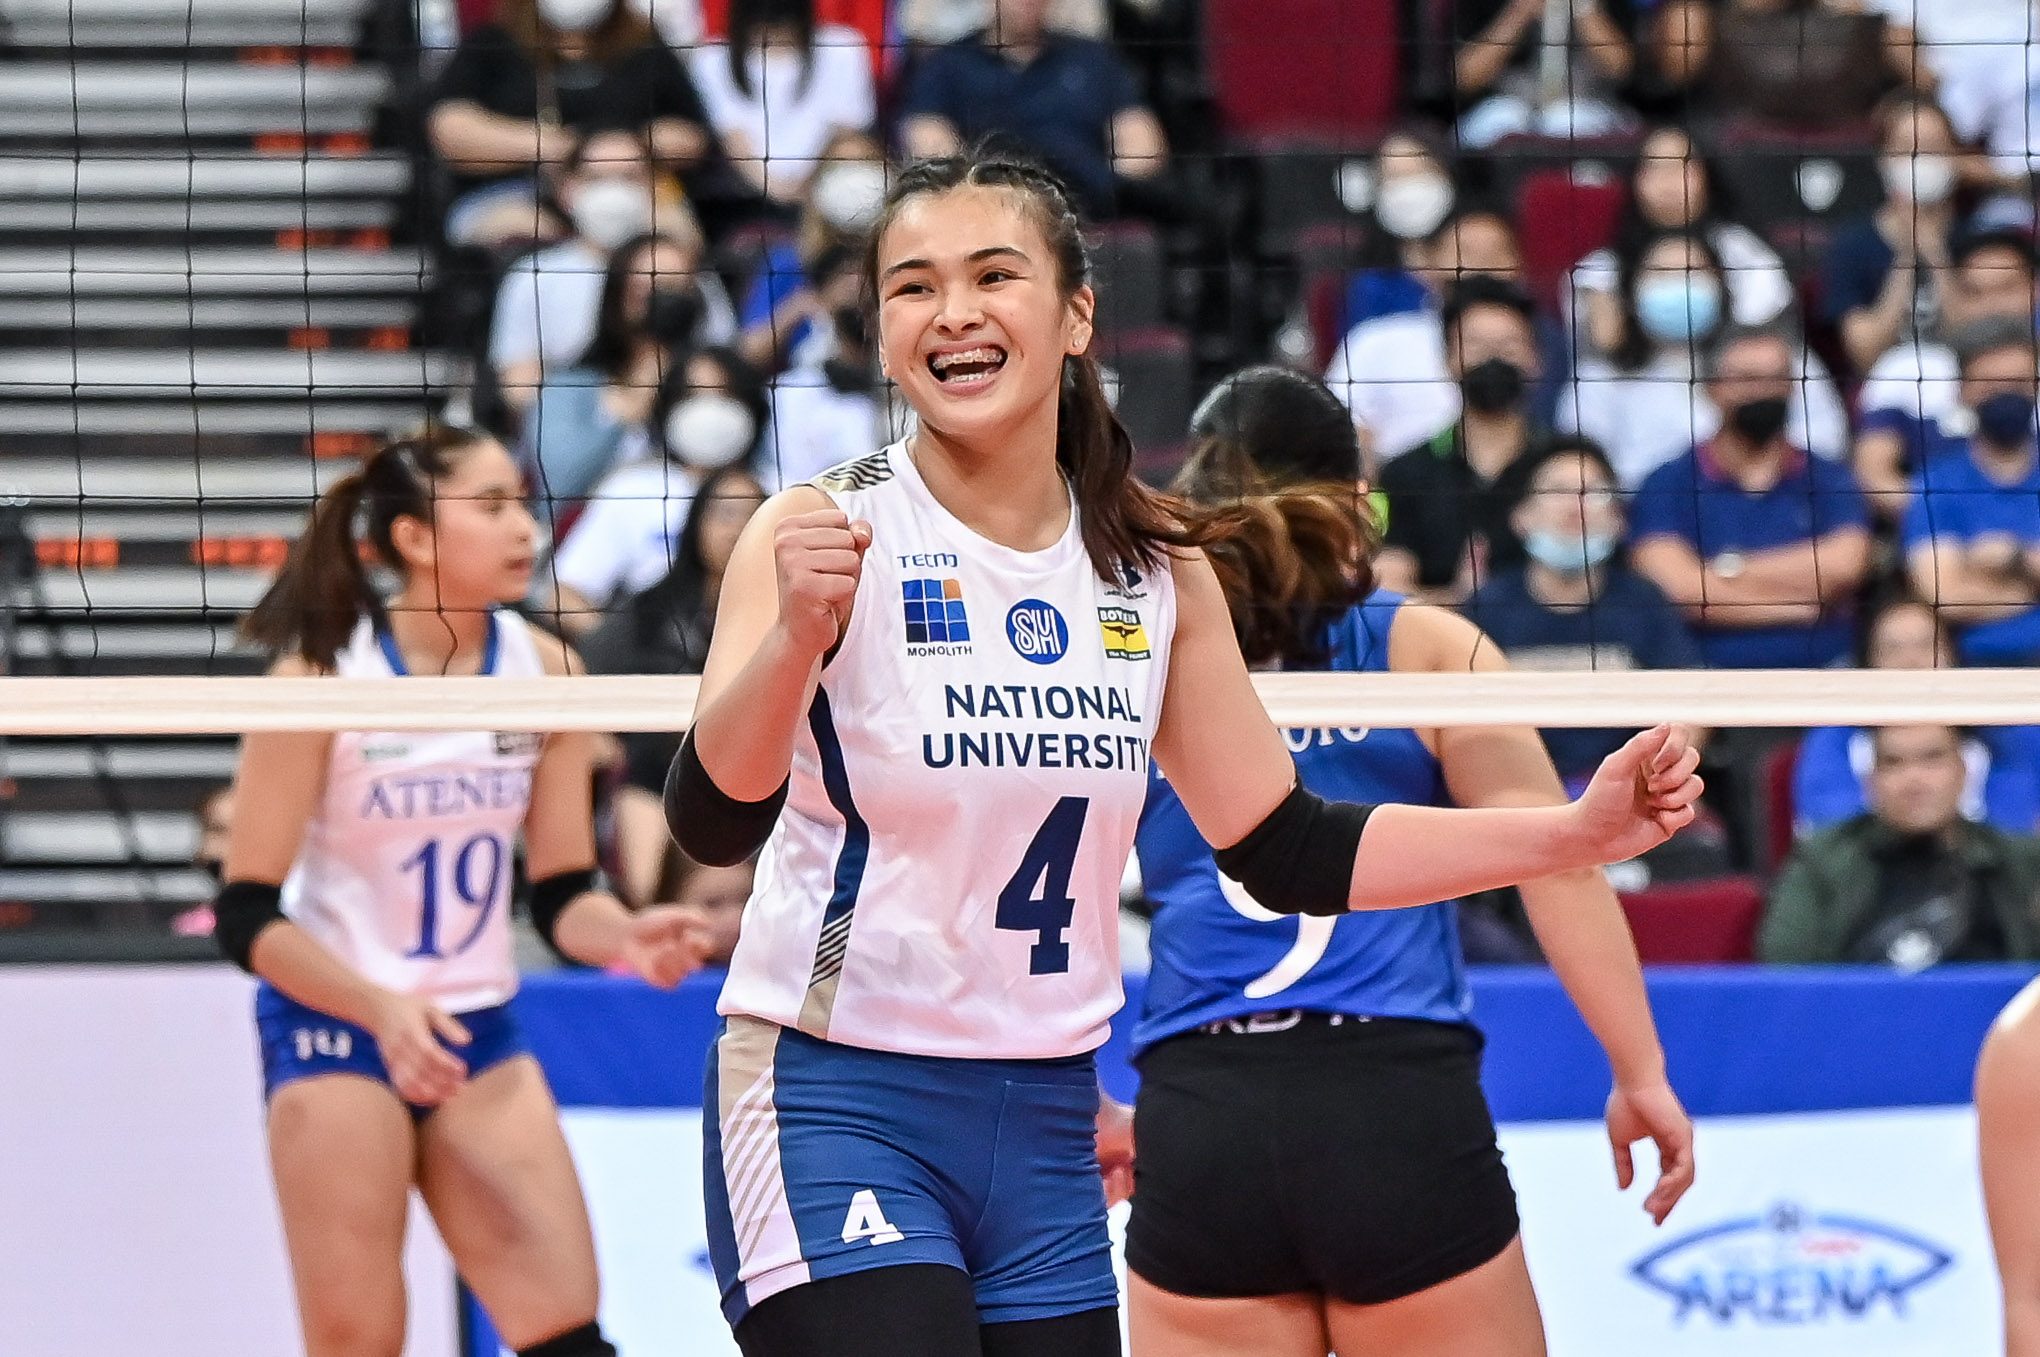 Mighty champ NU quickly stamps class, wrecks Ateneo in lopsided sweep